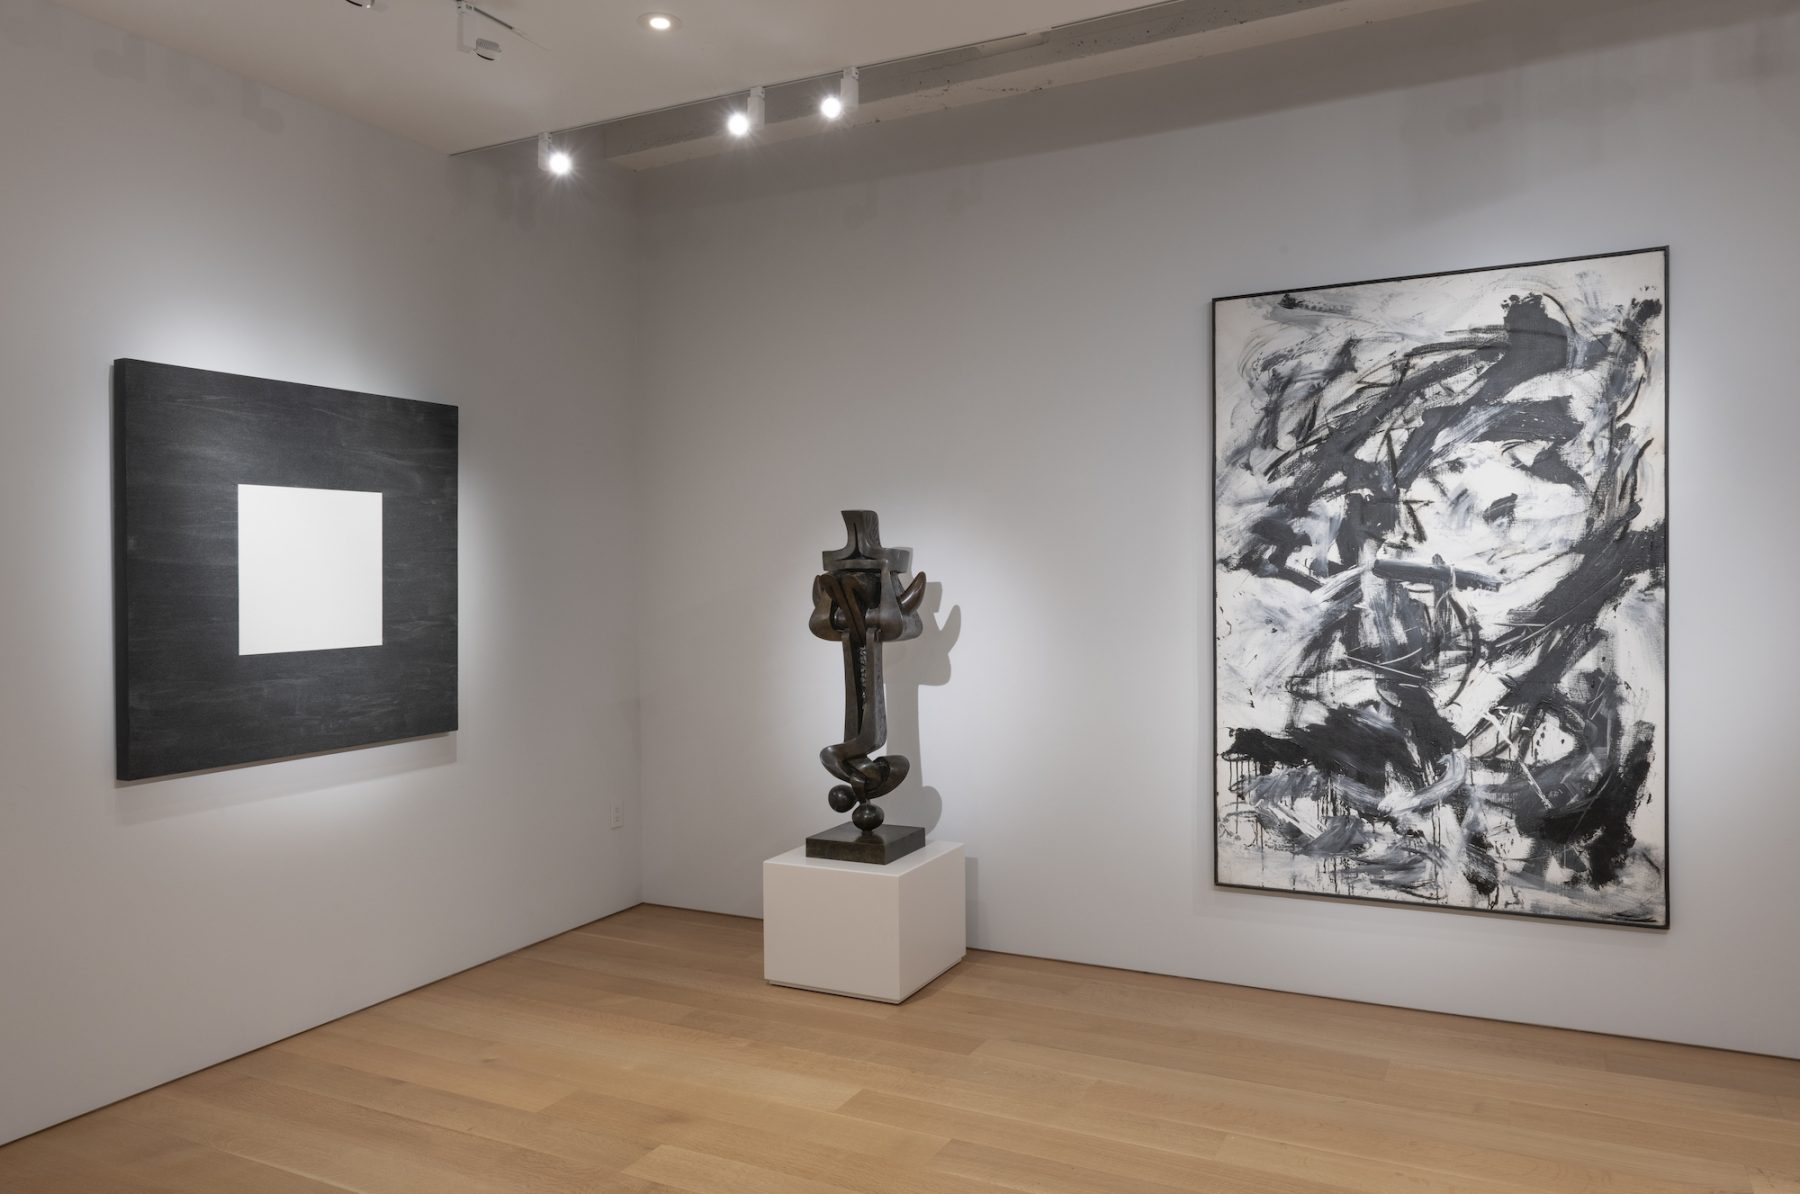 Gallery view of three different black and white pieces.